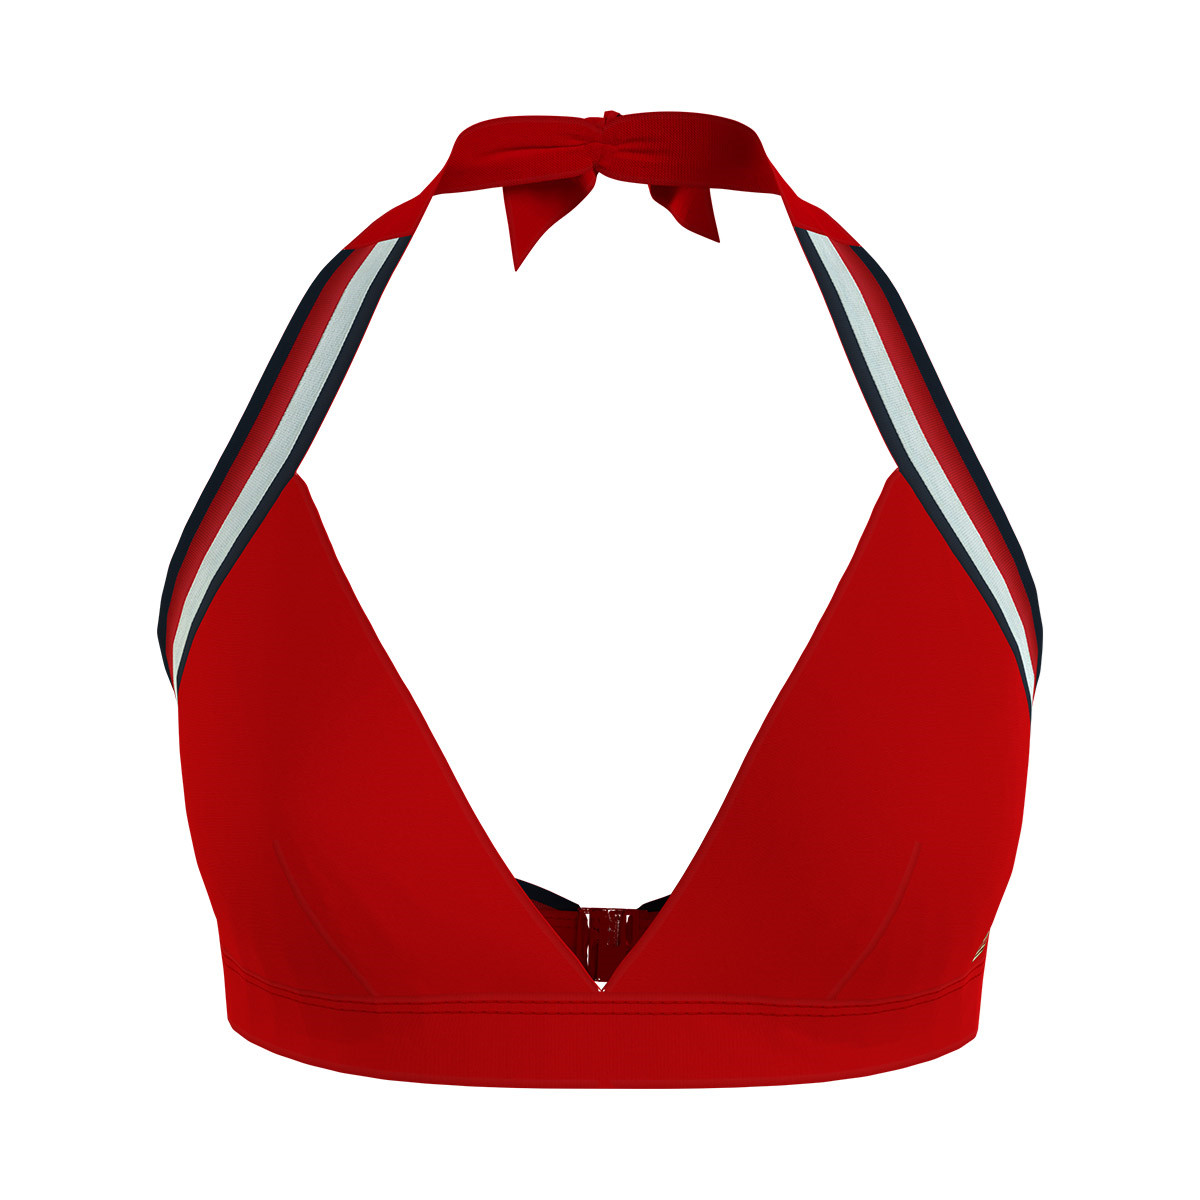 TOMMY HILFIGER TRIANGLE BIKINI TOP 02696 XLG (Primary Red, XS)